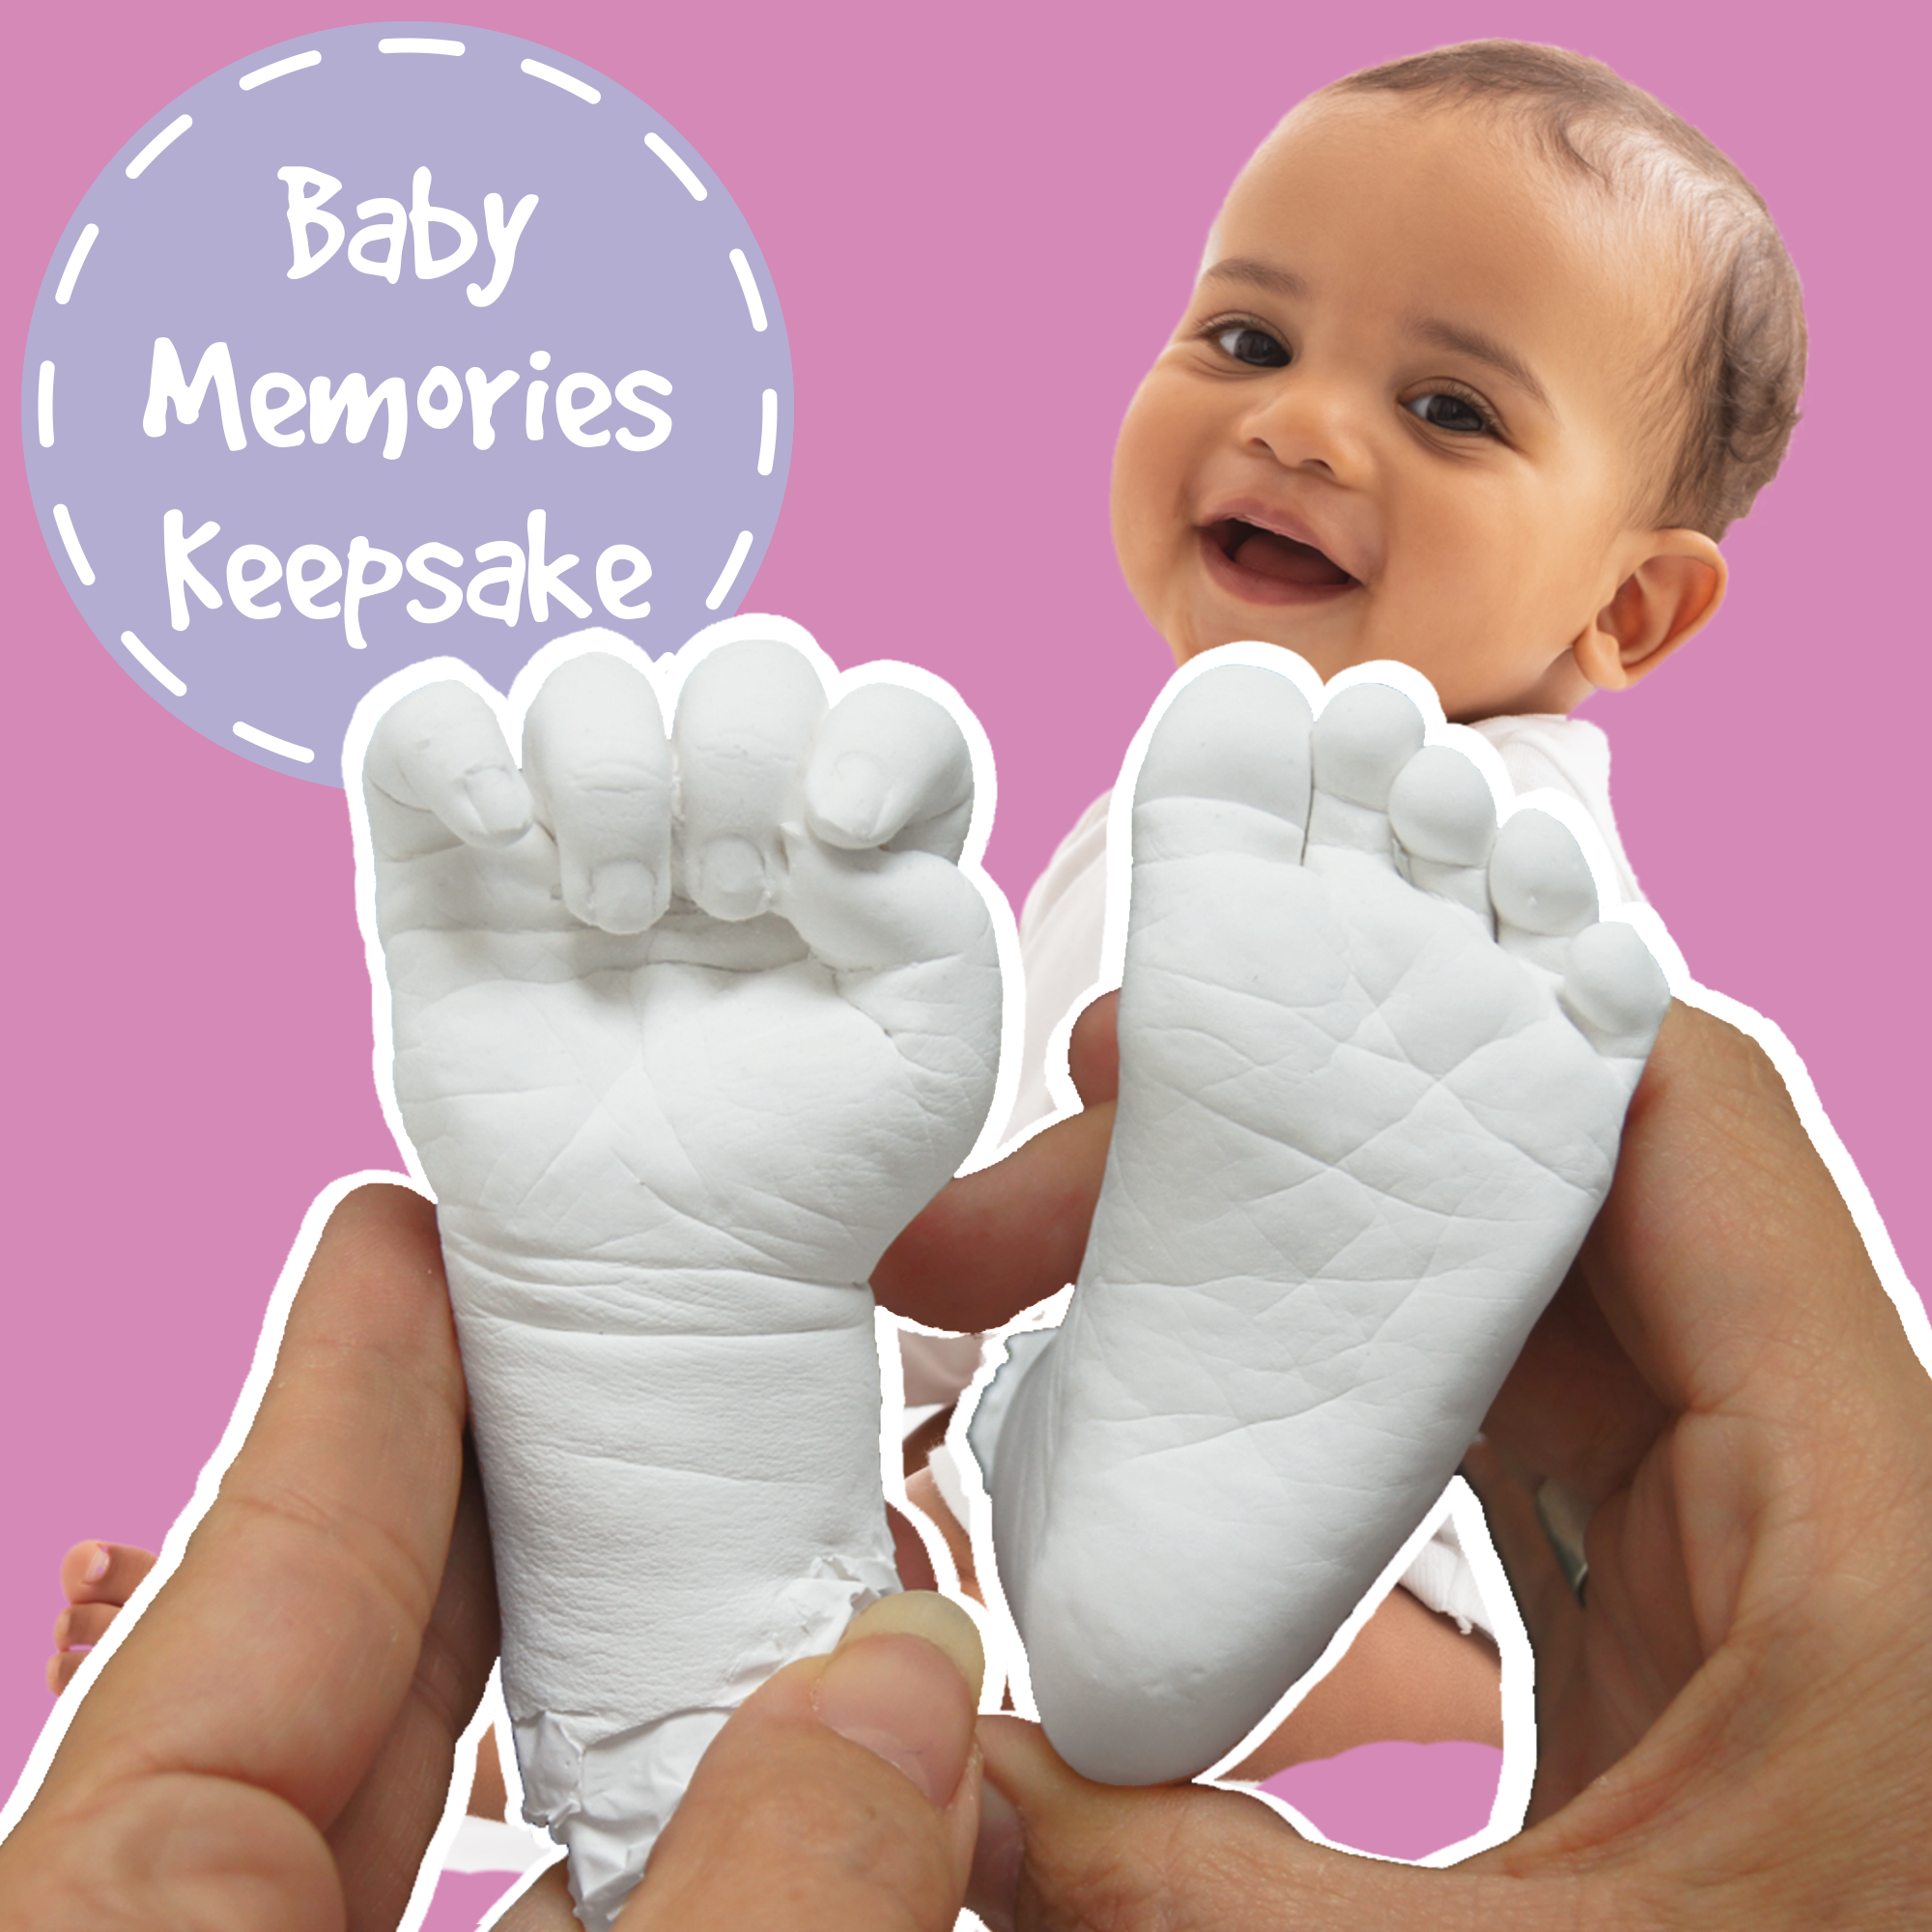 Baby hand and foot casting kit